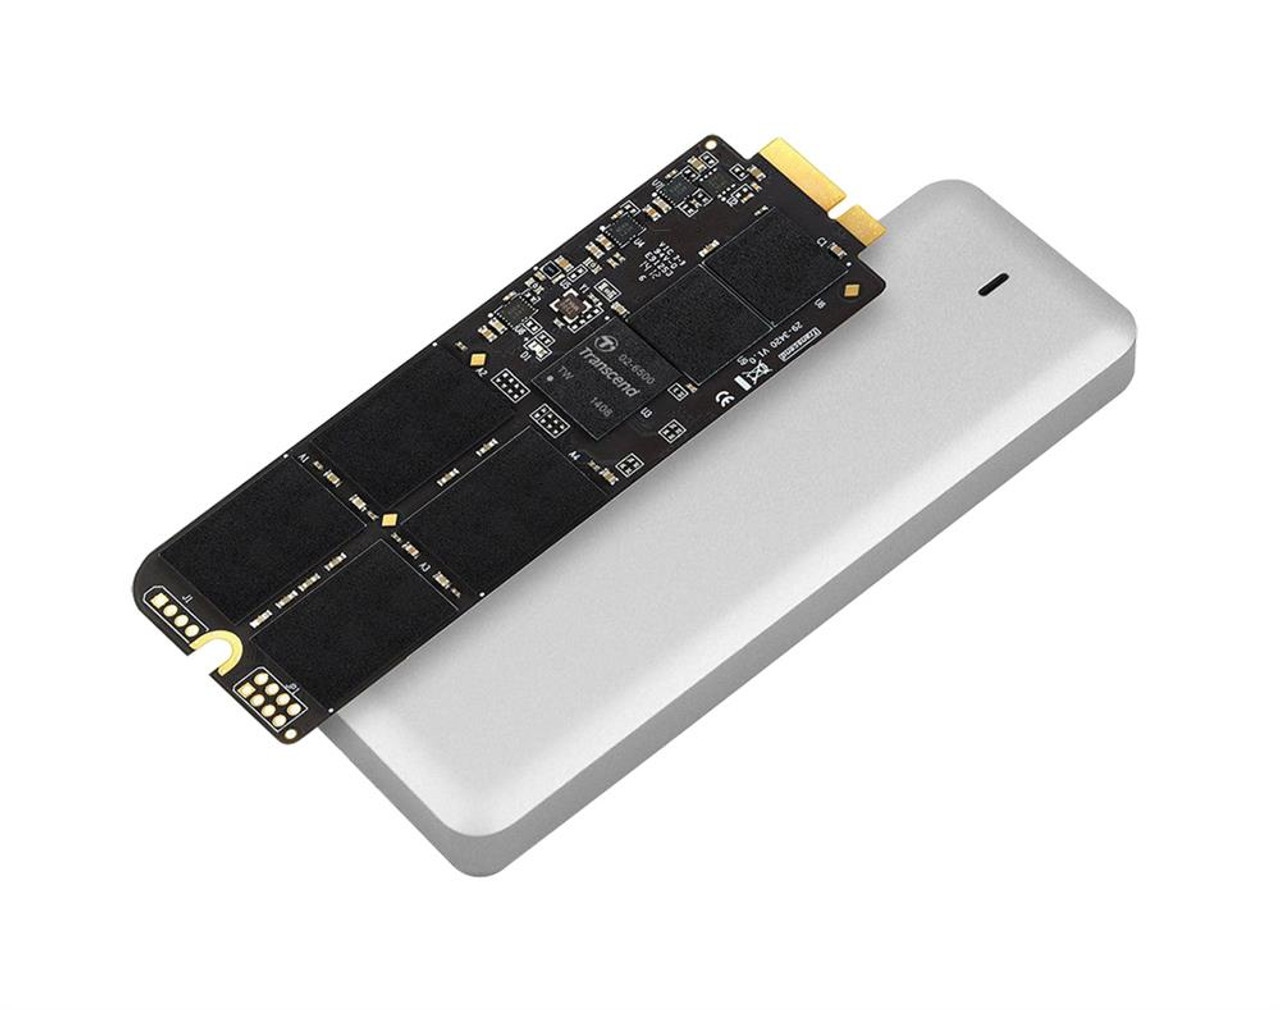 SATA 6.0 Gbps 240GB Solid State Drive